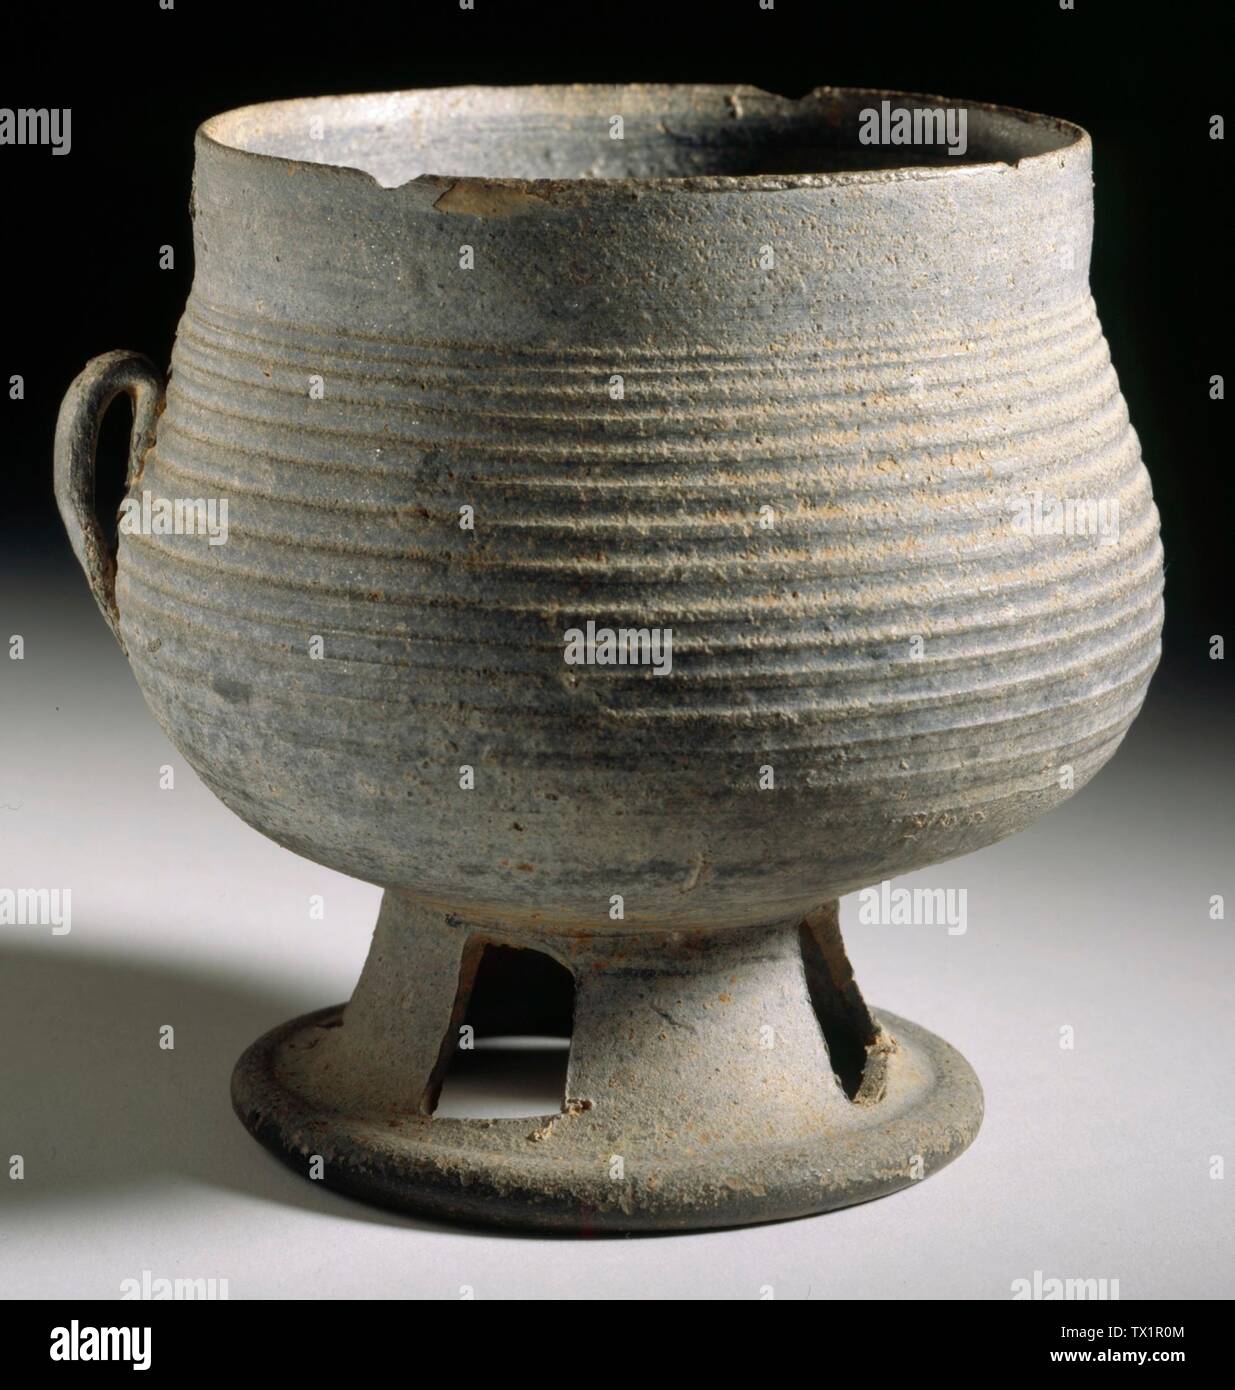 Cup with Handle;  Korea, Korean, Three Kingdoms period, Old Silla kingdom, 57 B.C.-A.D. 668, 5th-7th century Furnishings; Serviceware Wheel-thrown stoneware with combed, modeled, and applied decoration 4 1/8 x 4 1/8 x 4 in. (10.48 x 10.48 x 10.16 cm) Purchased with Museum Funds (M.2000.15.58) Korean Art; 5th-7th century; Stock Photo